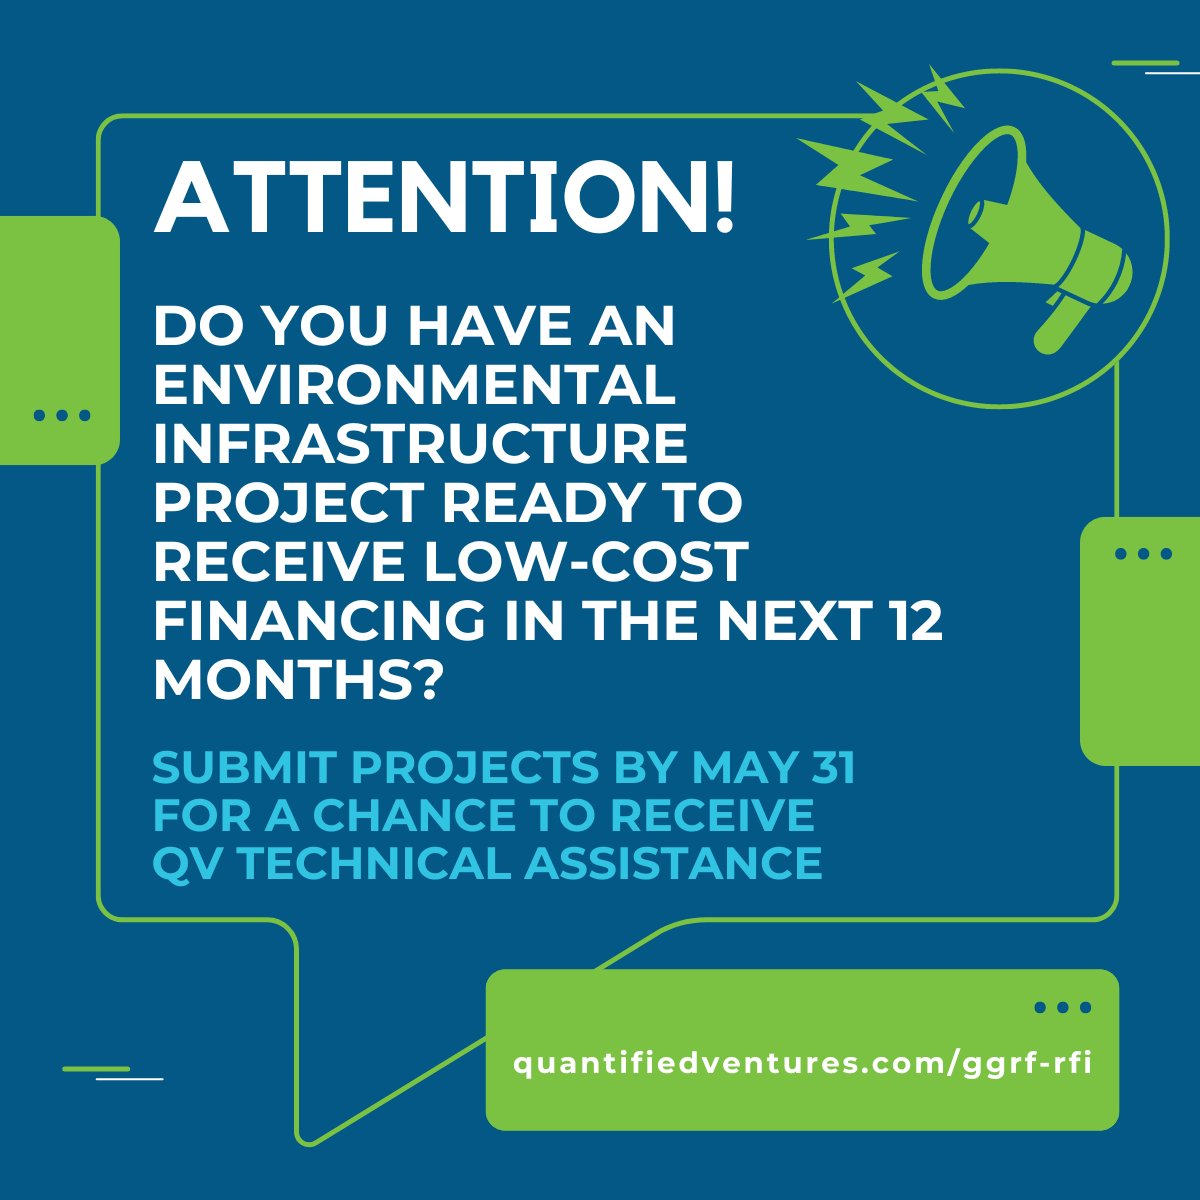 We're launching a national RFI to build a pipeline of enviro infrastructure projects to receive investment from the EPA’s $20B Greenhouse Gas Reduction Fund. Selected projects will receive tech assistance + transaction structuring from QV! Submit by 5/31: quantifiedventures.com/ggrf-rfi